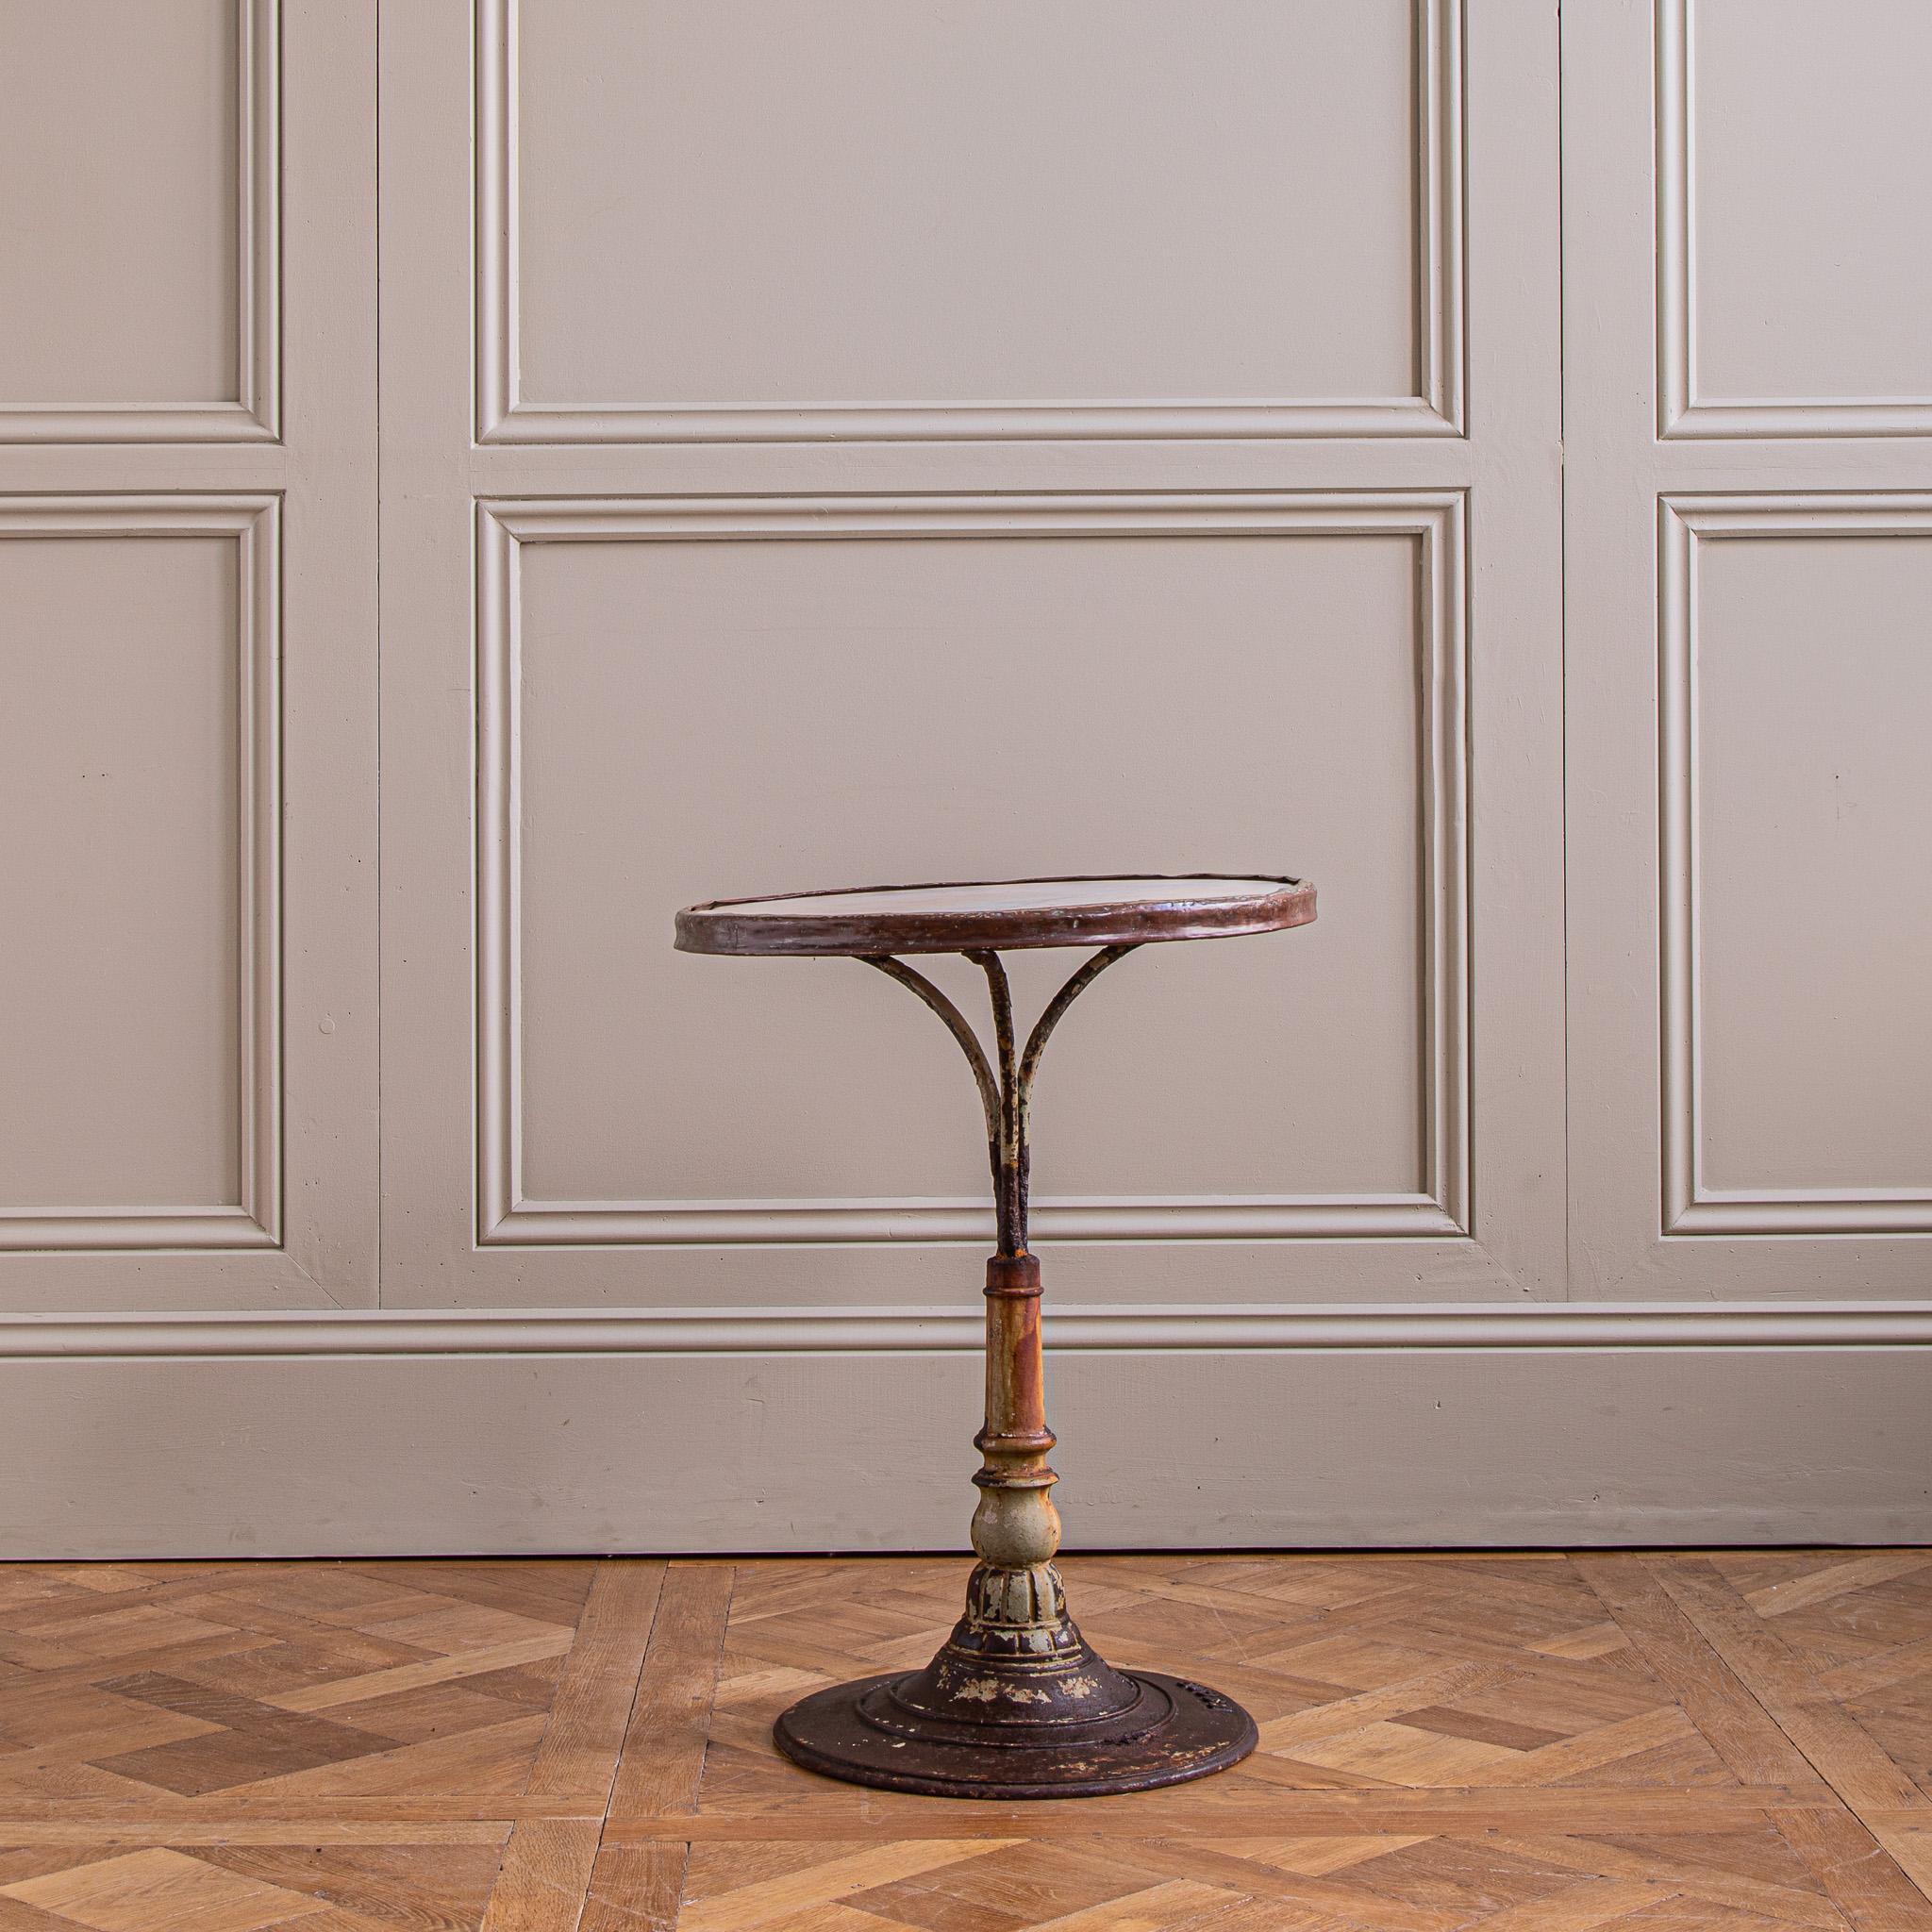 A French cast iron bistro table from the turn of the 20th century with lots of character and charm. The beautifully cast iron pedestal, featuring attention to detailing in its moulding, still has a degree of the original old paintwork which is now a